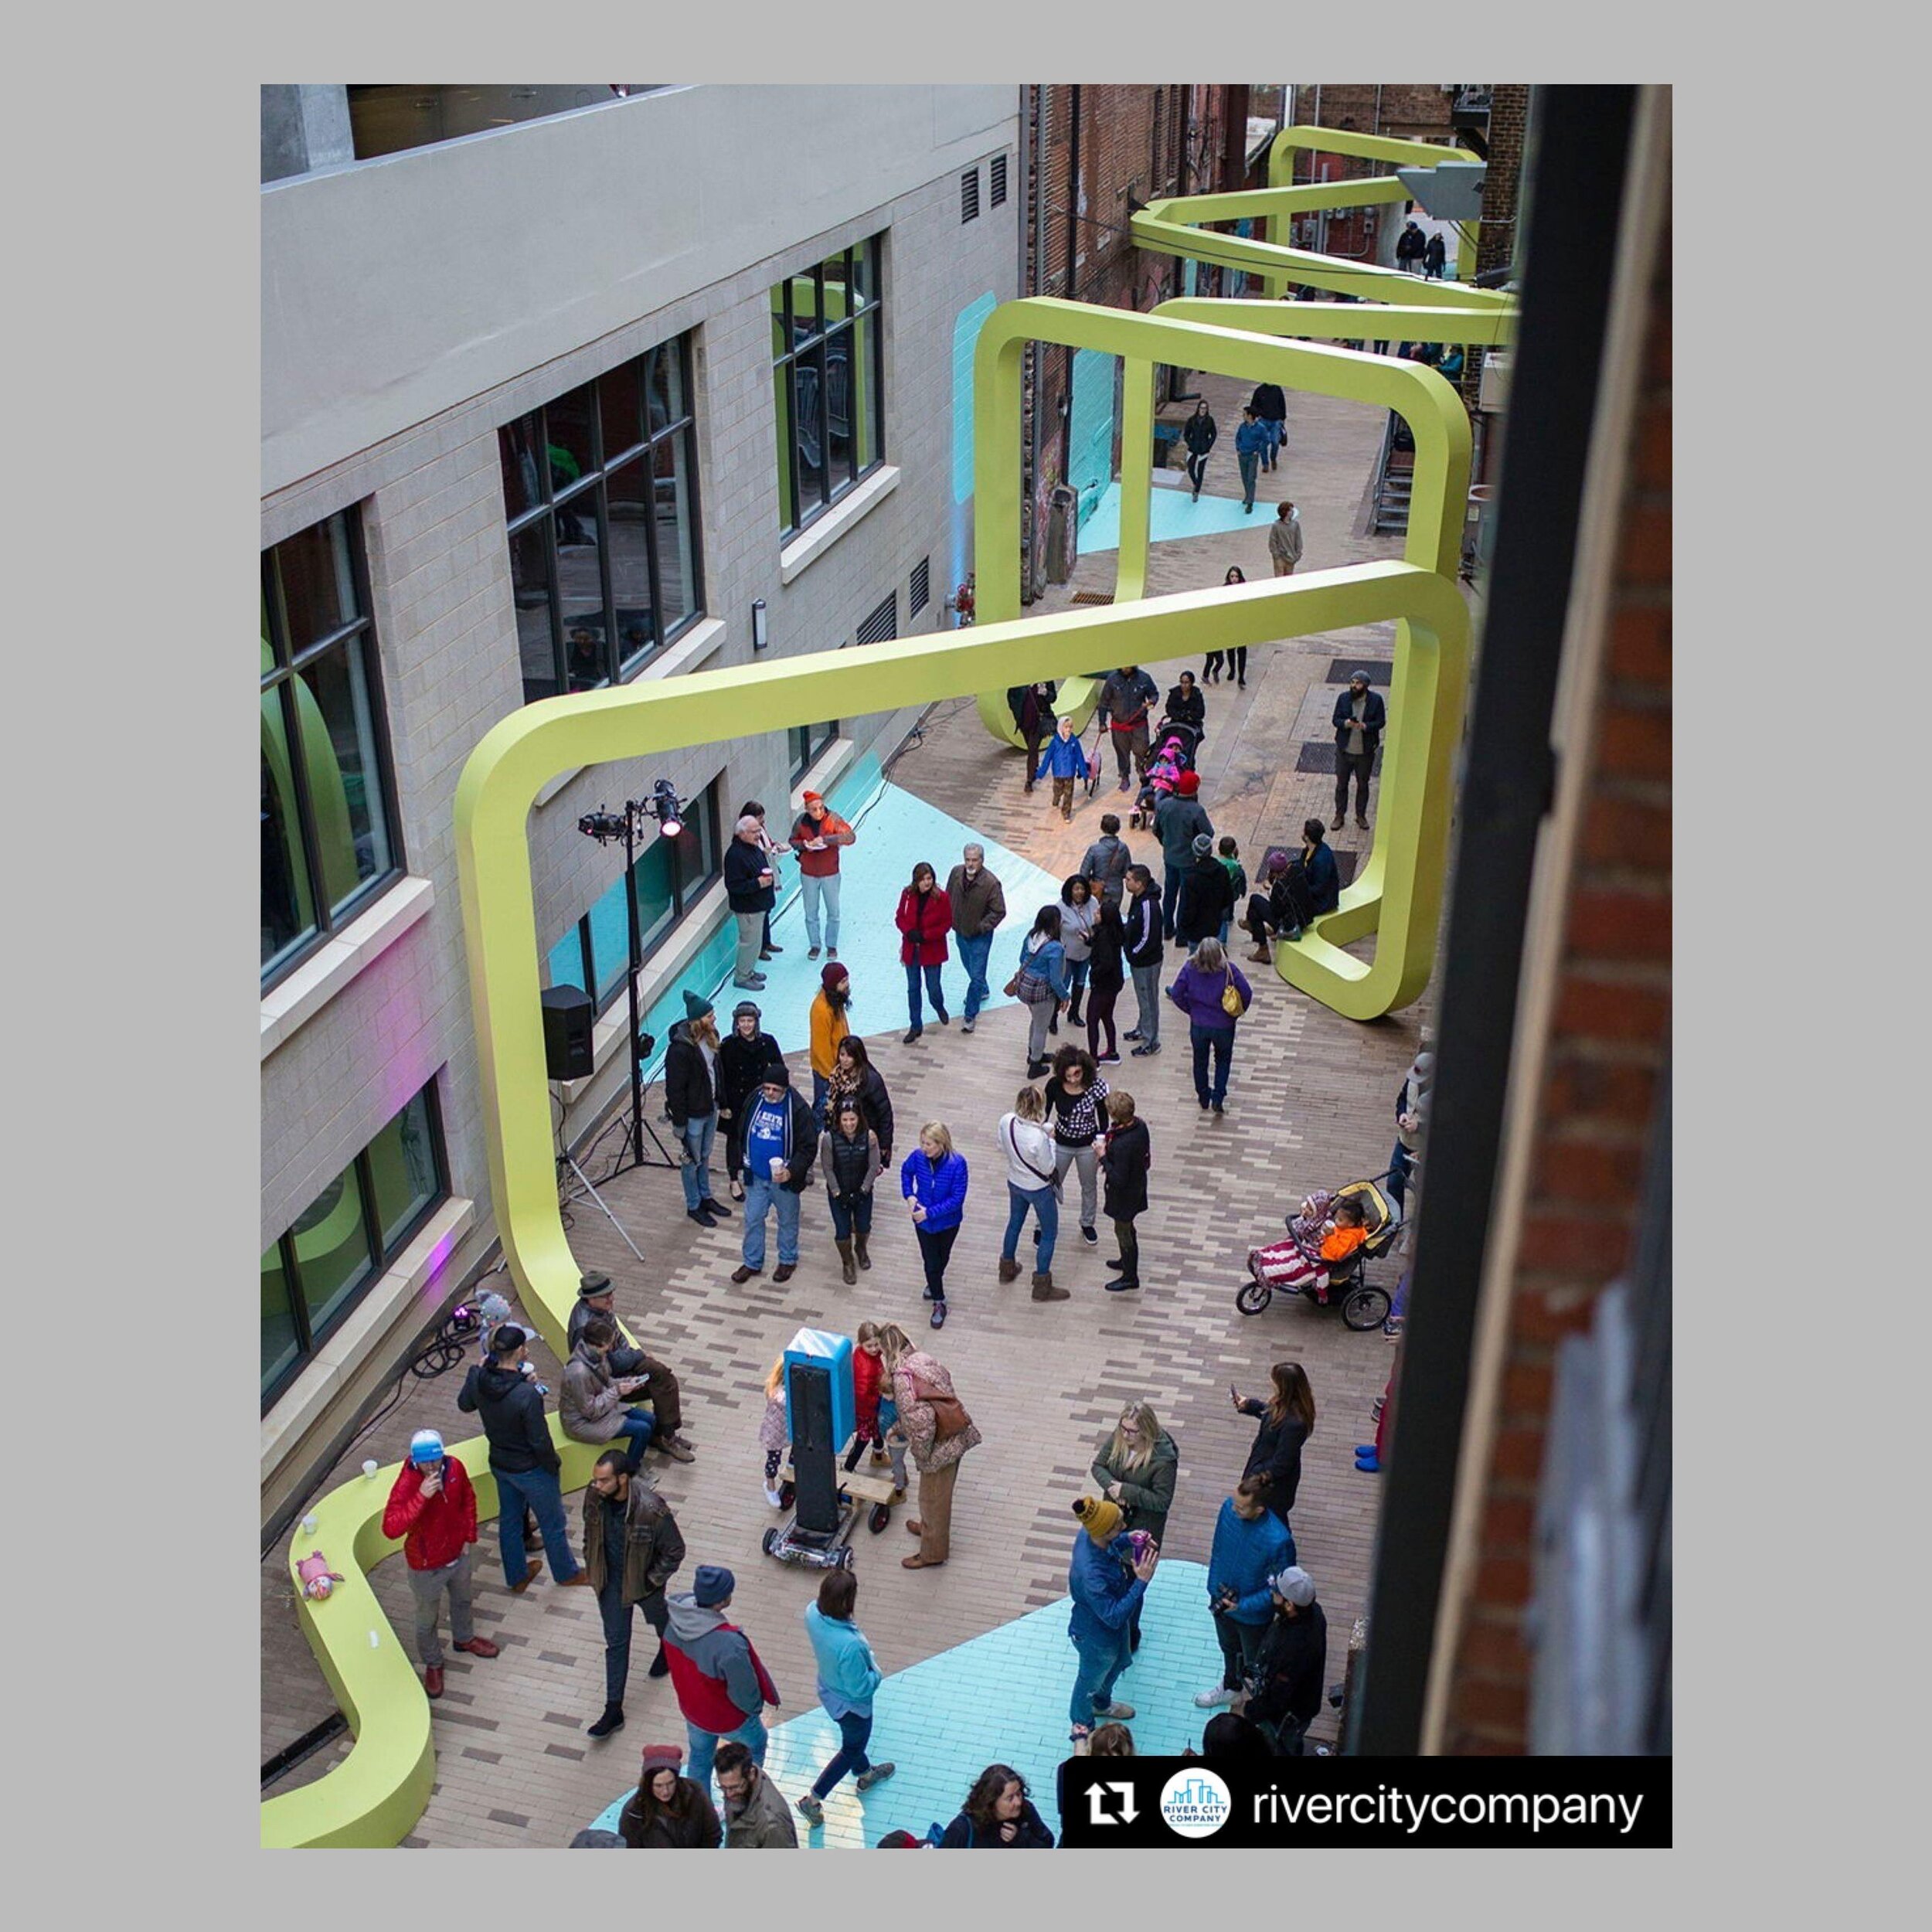 Do you know the story behind Chattanooga&rsquo;s public art, &ldquo;City Thread&rdquo;?&nbsp; It is the result of an international design competition that sought to reclaim and activate unused alley space.
&nbsp;
To enhance a new downtown alleyway in